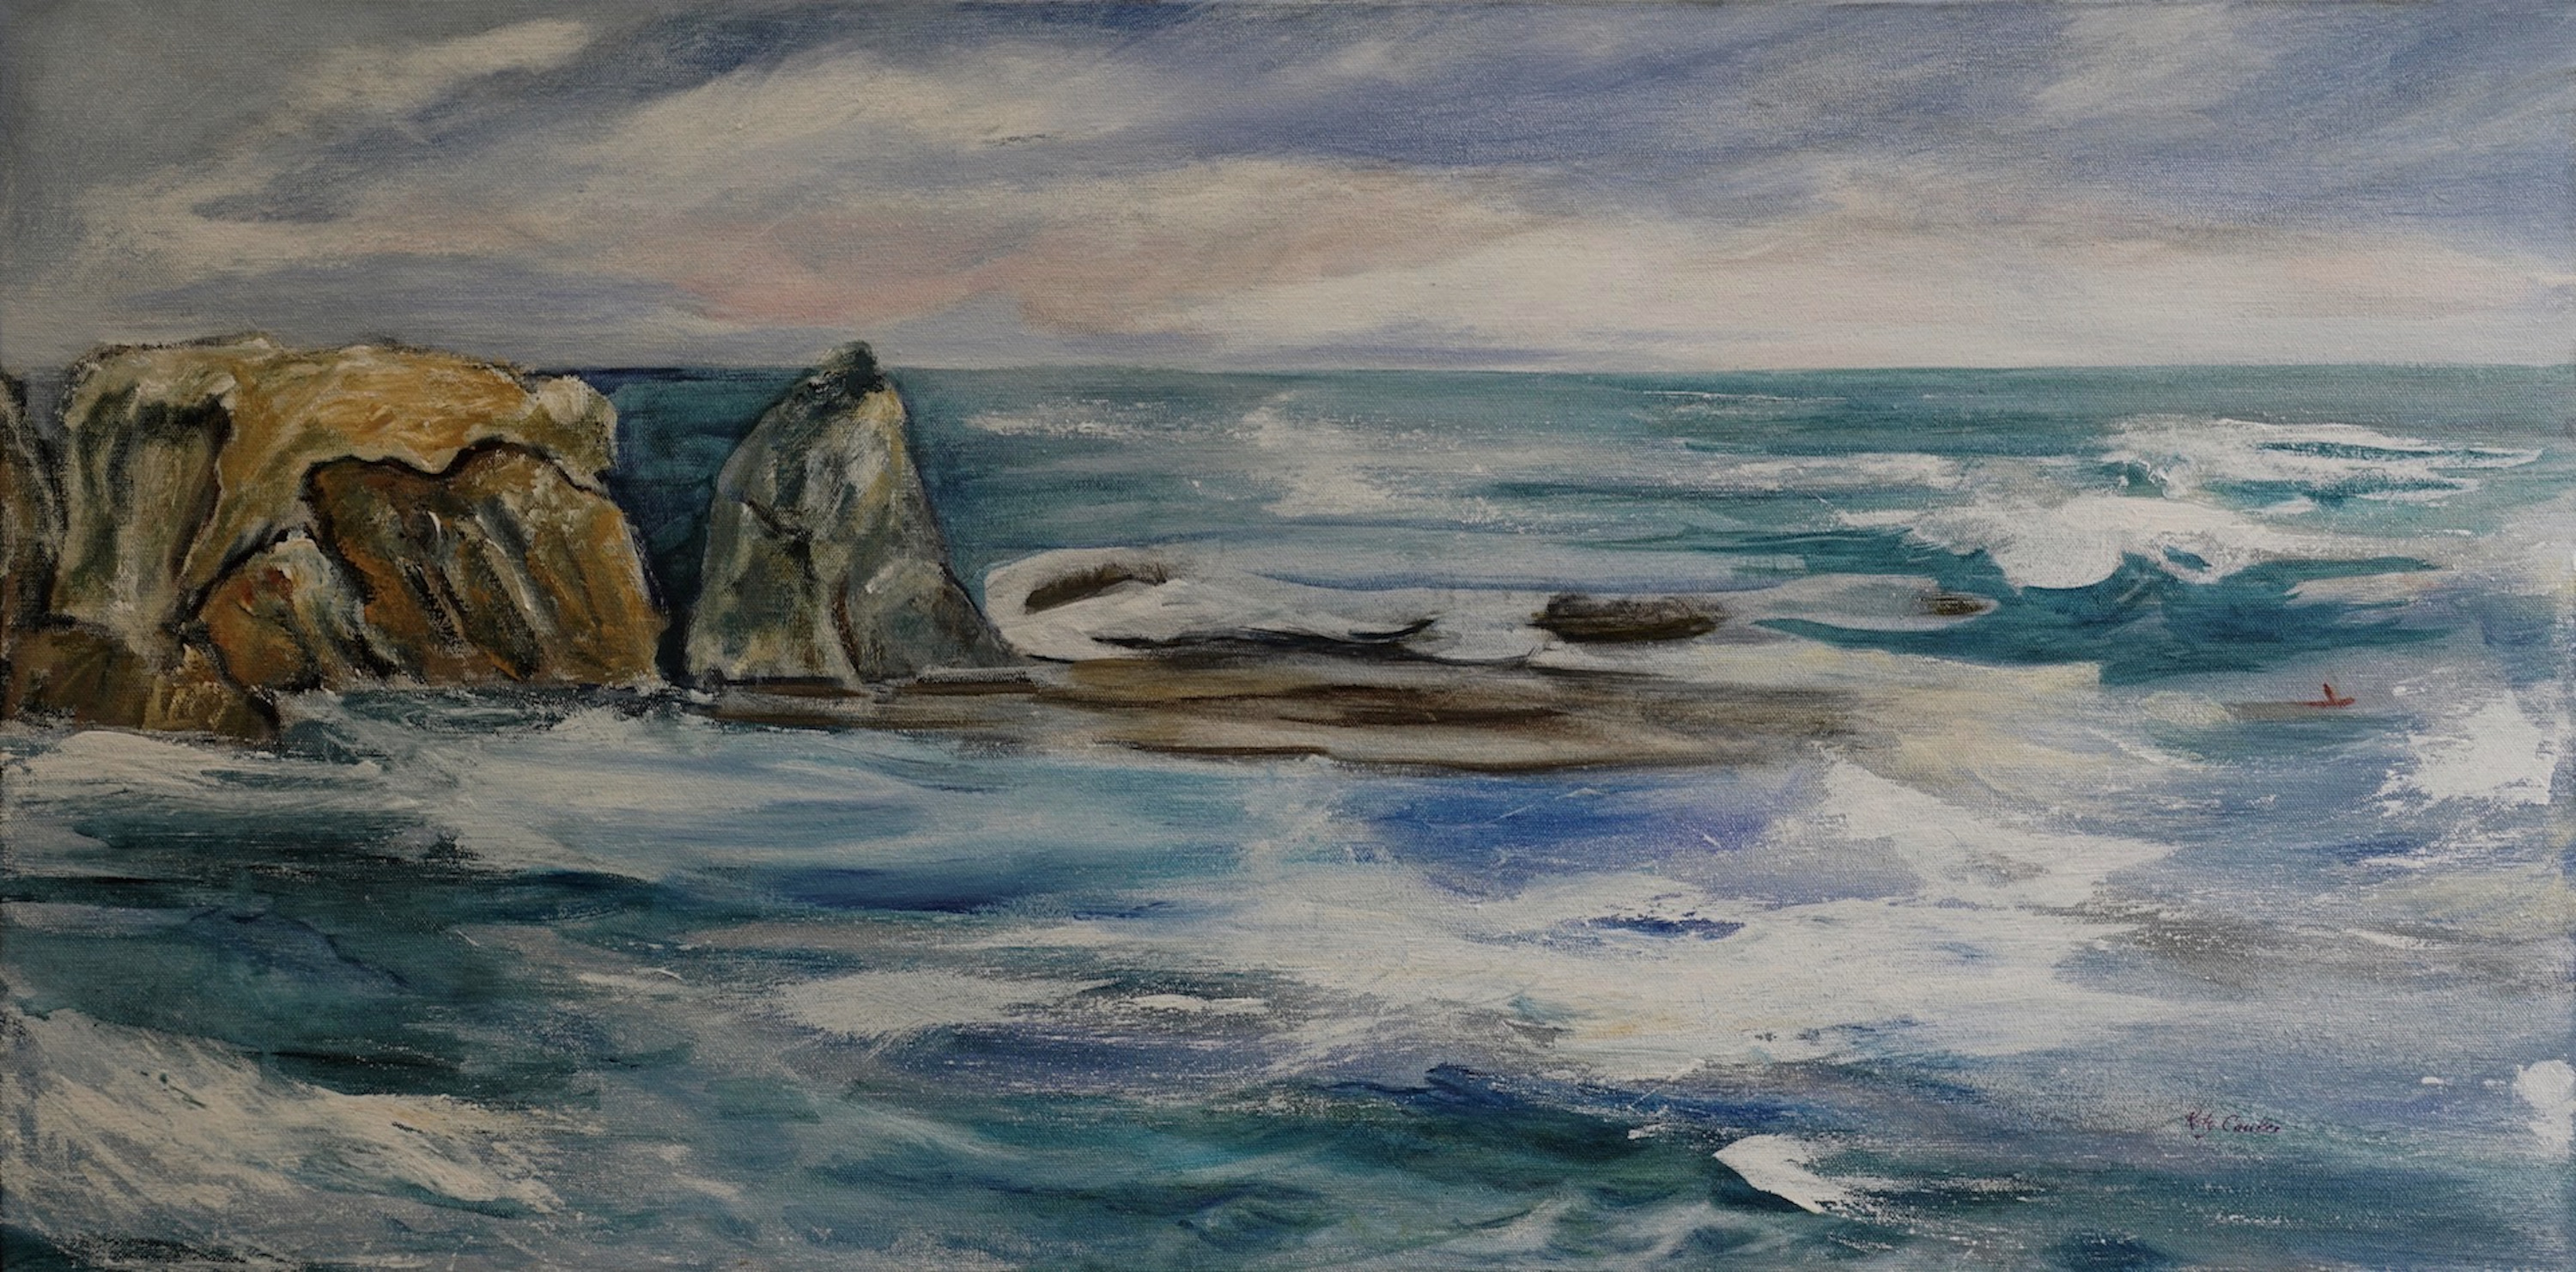 403  out to sea   cape arago orig or giclee dsc04711 tm8vjl